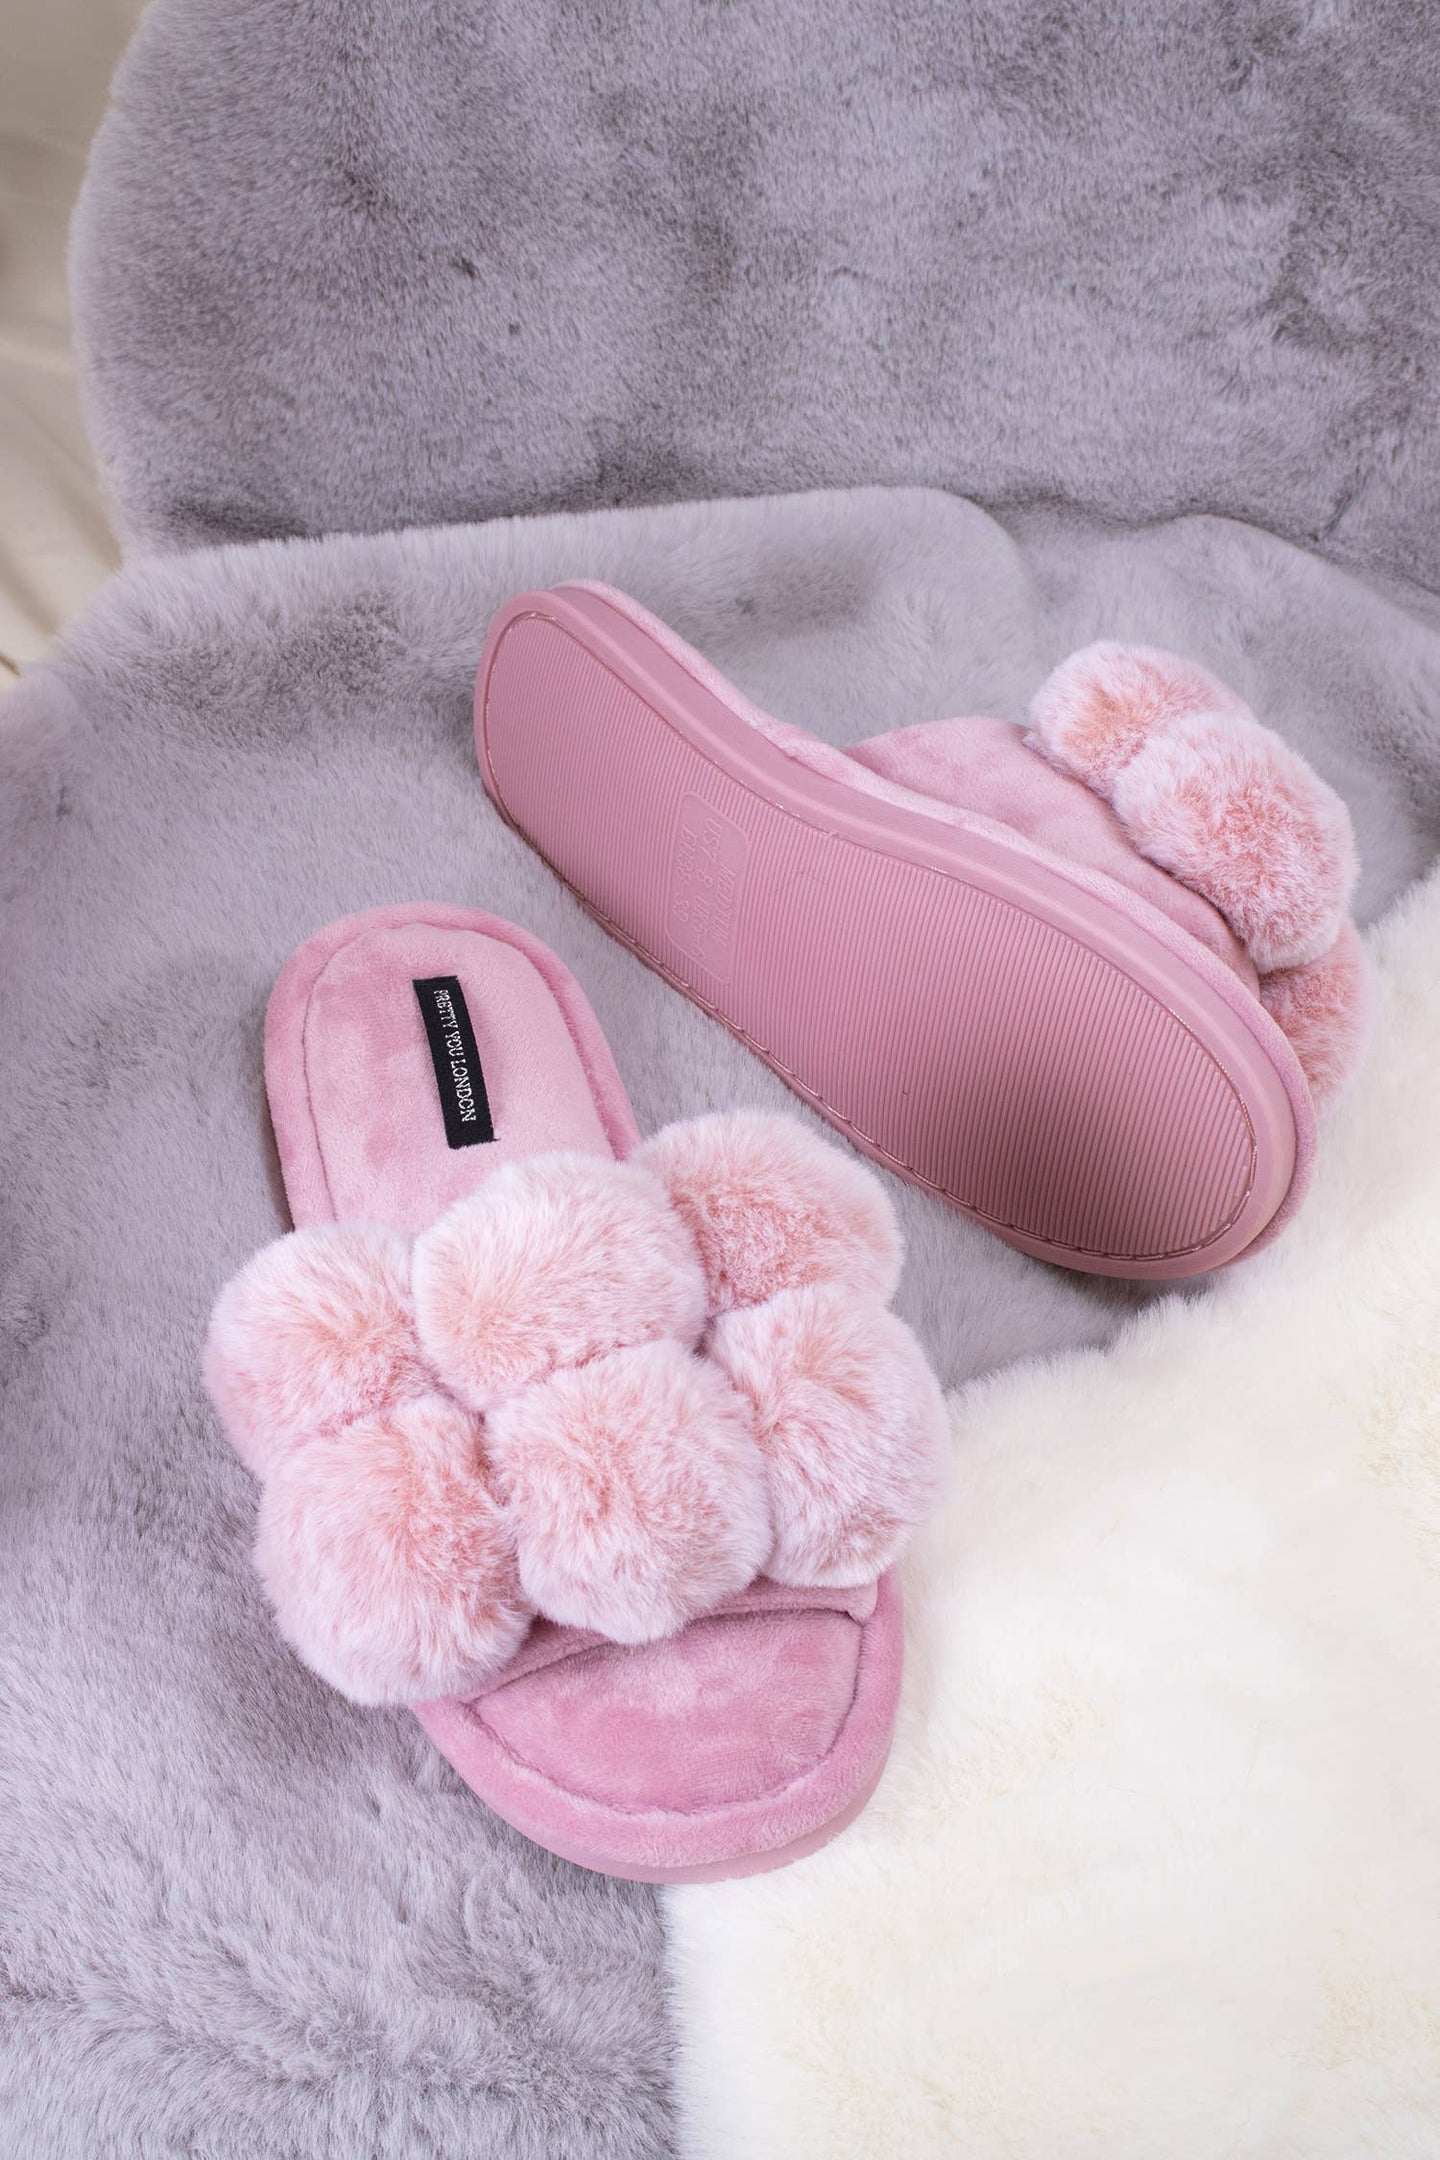 Pretty You London - Dolly Pom Pom Slippers in Pink: Pink / L = UK 7-8 / EU 40-41 / US 9-10